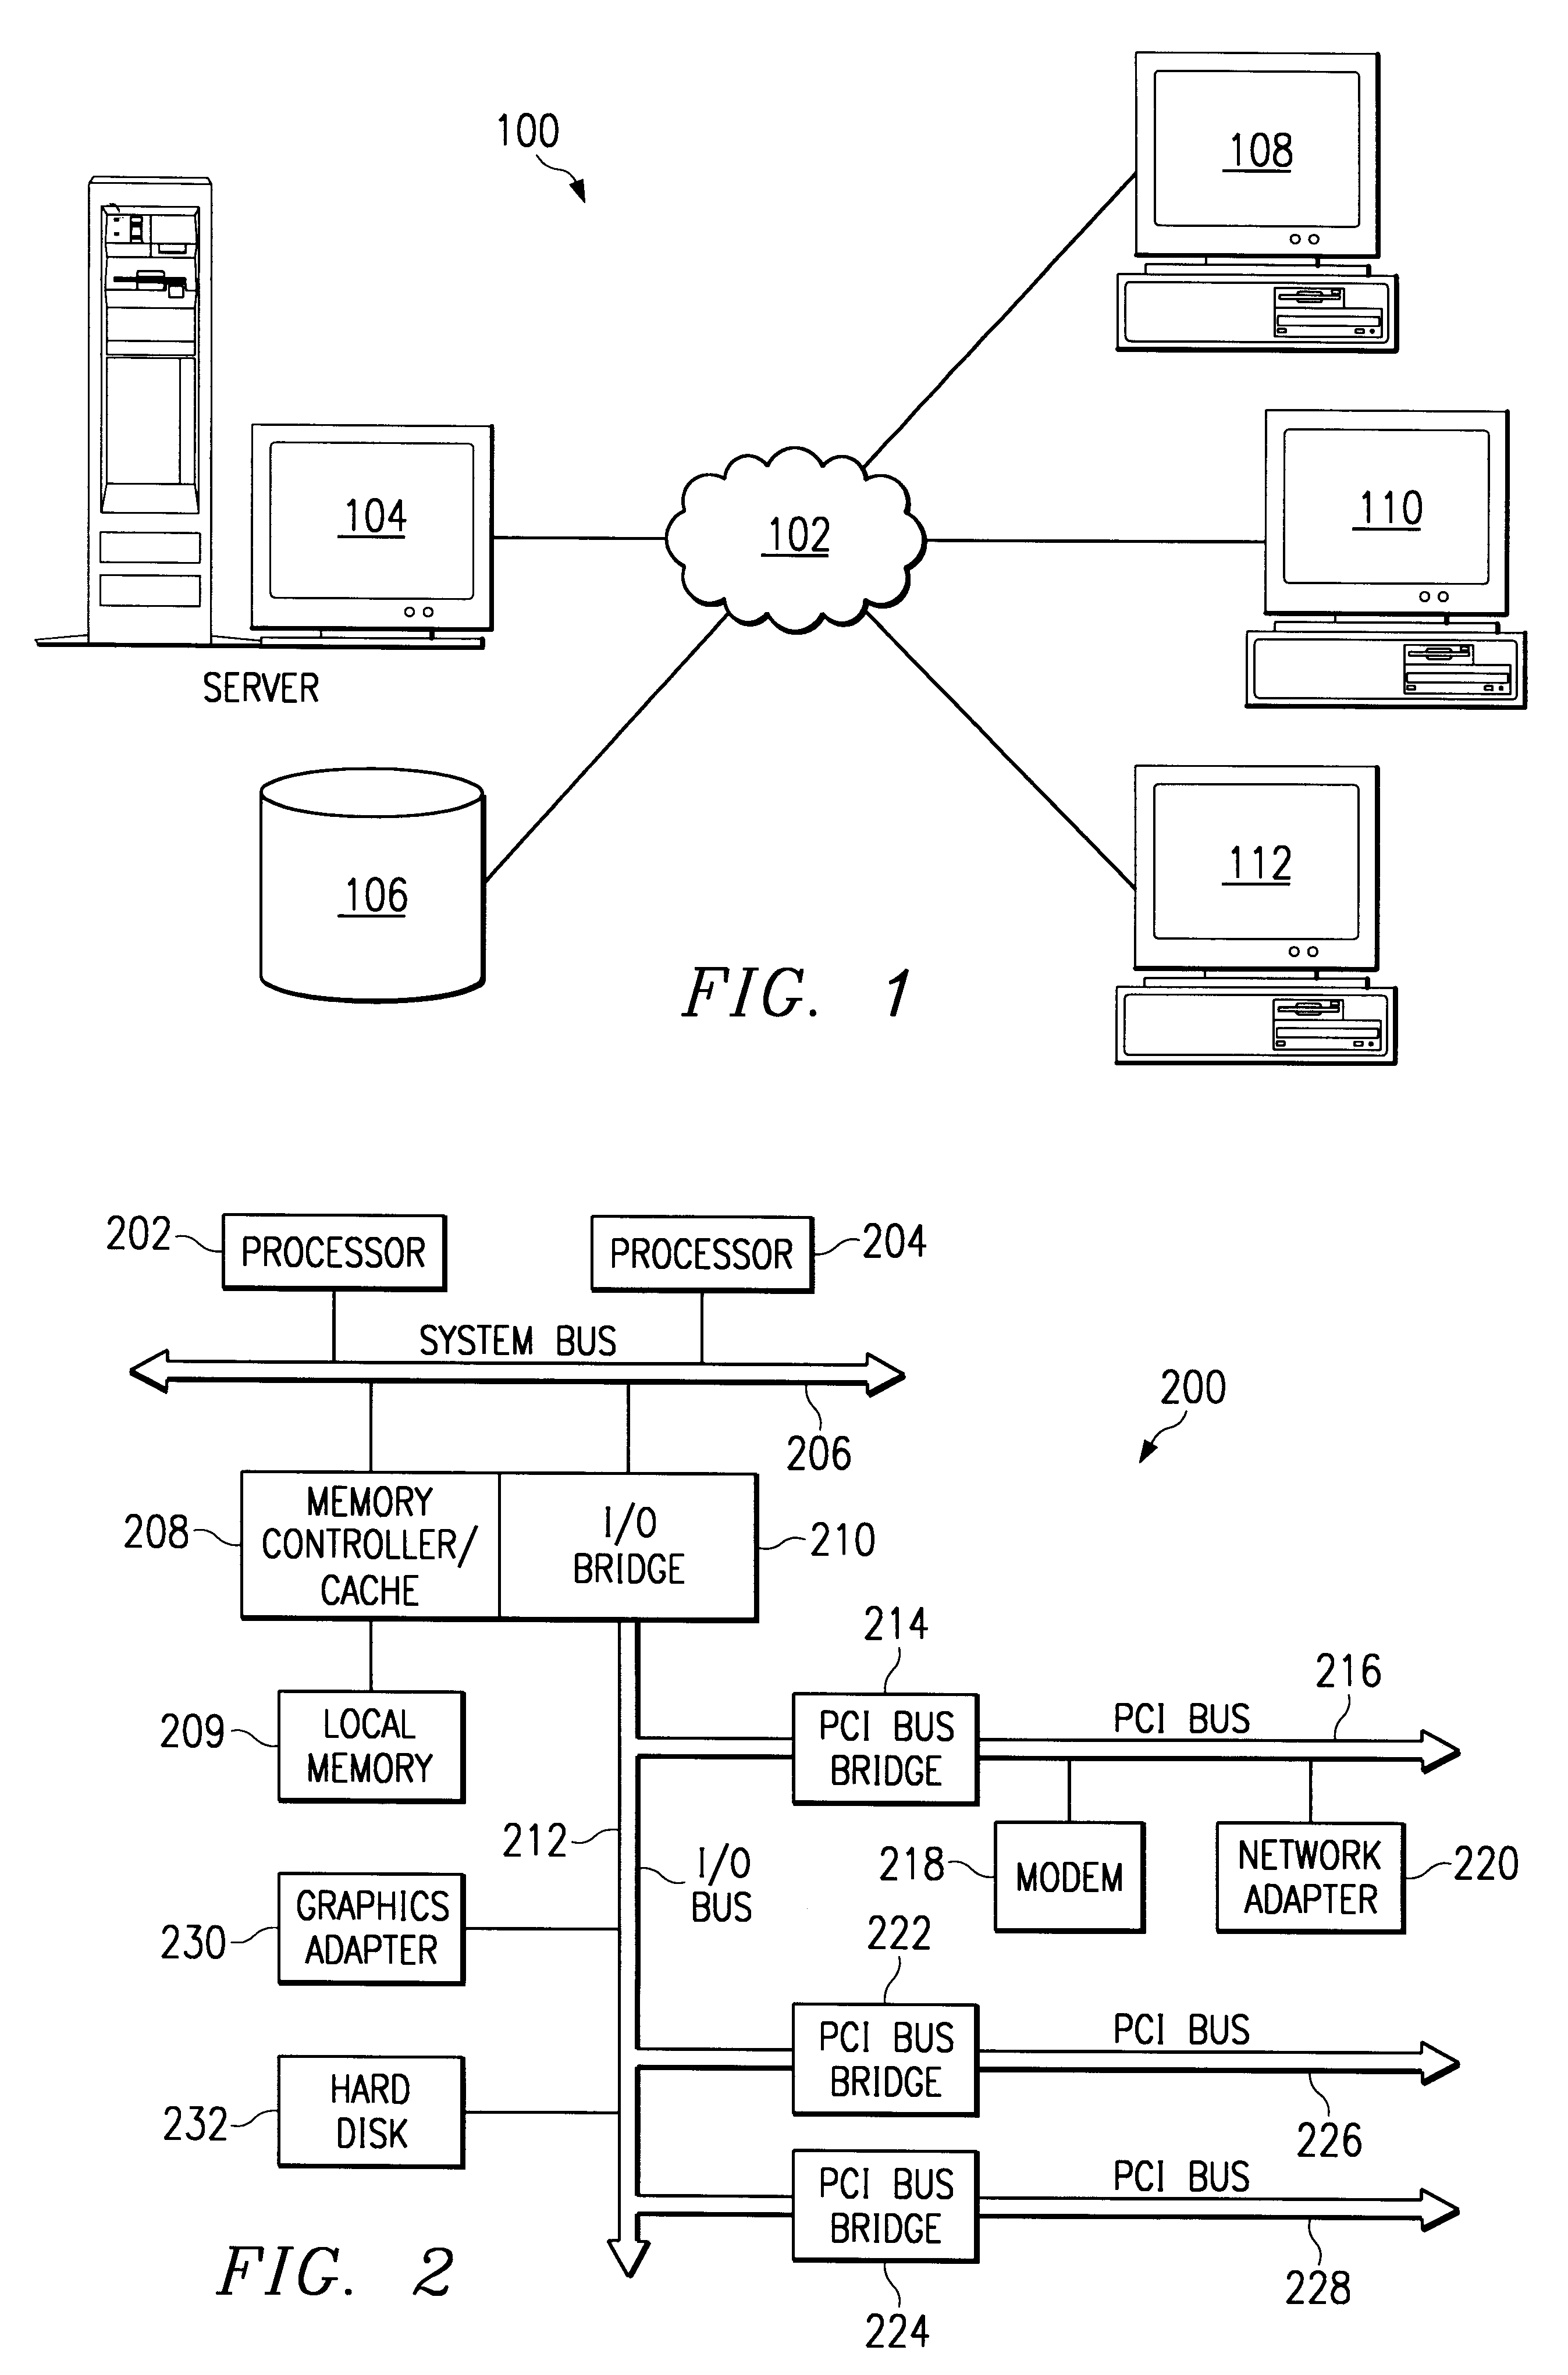 Method and apparatus for remotely booting a client computer from a network by emulating remote boot chips